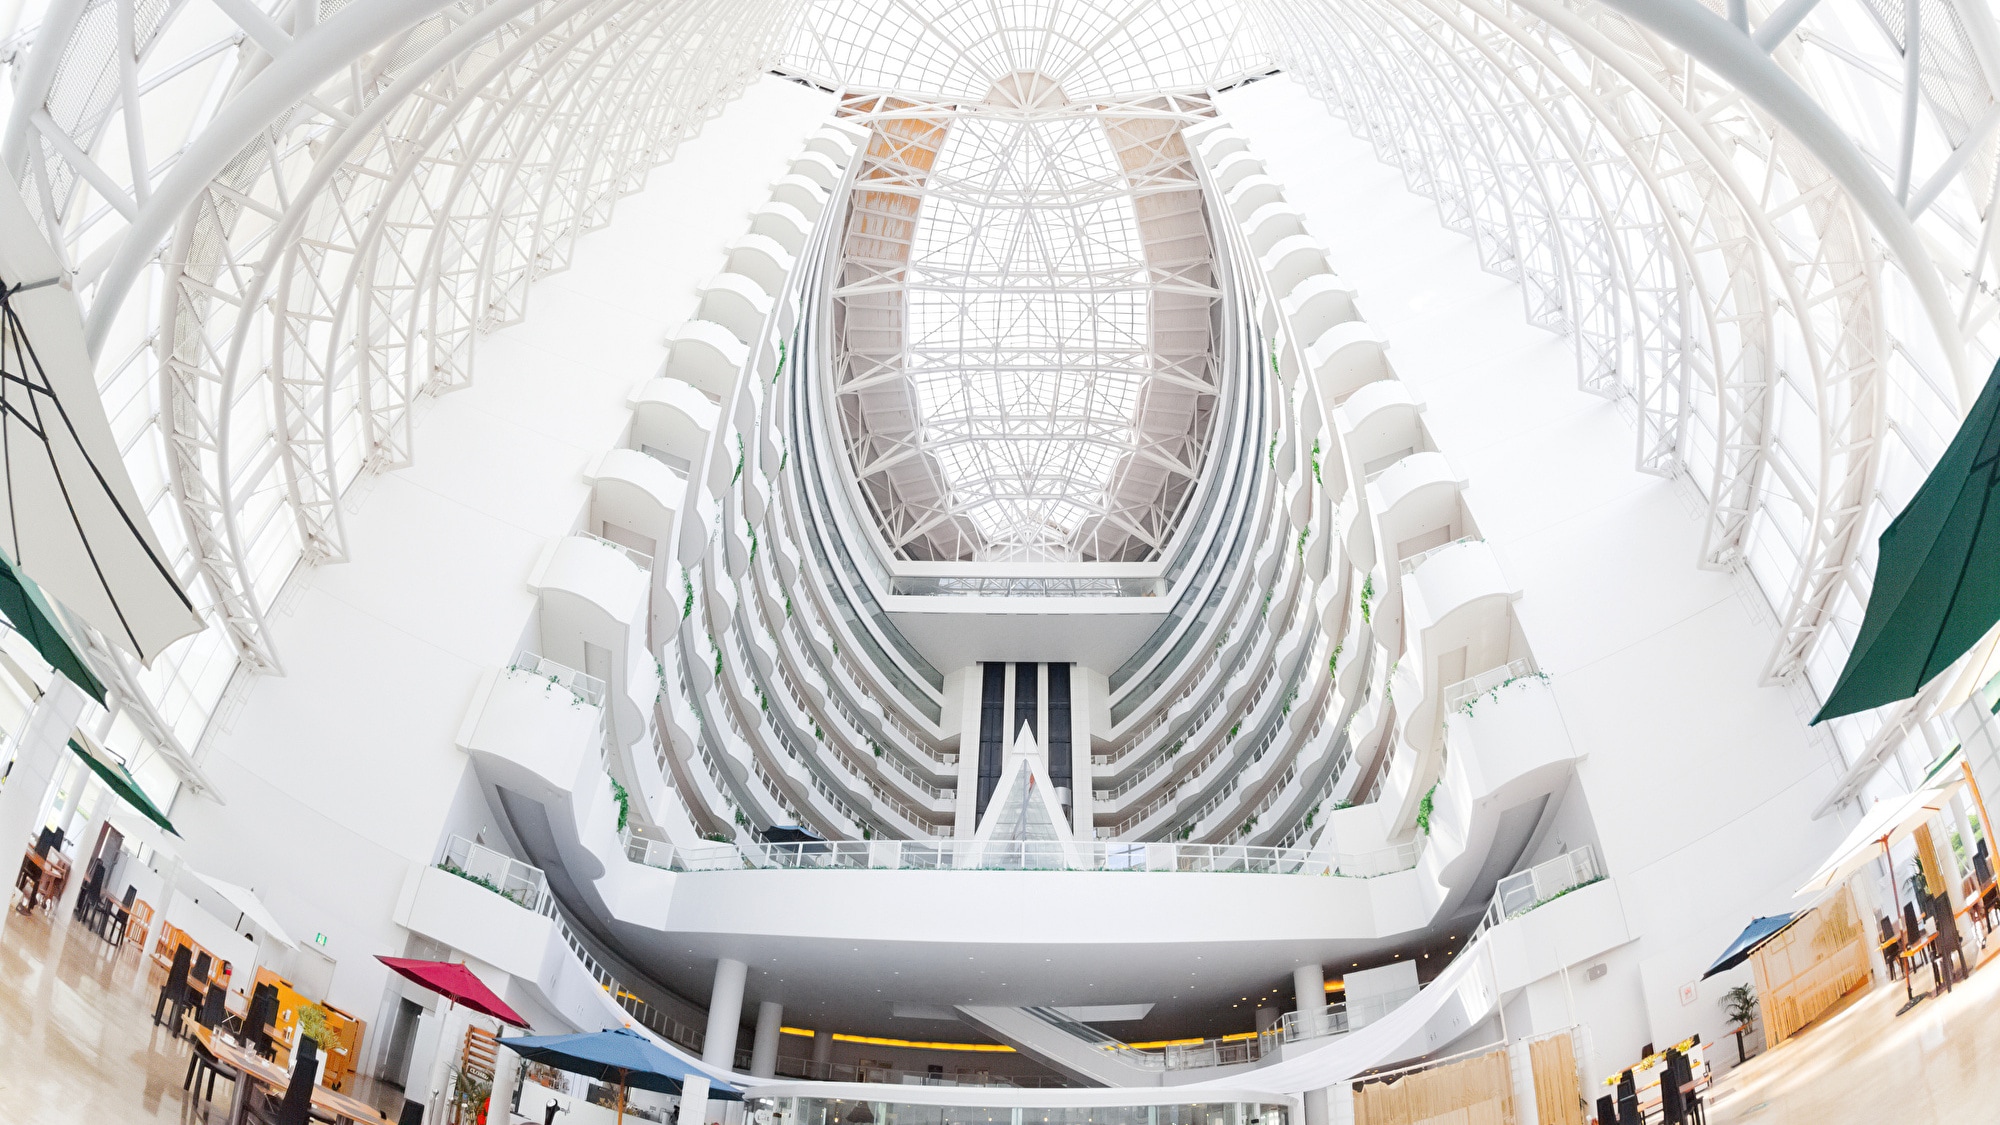 One of the largest atrium spaces in Japan, a large atrium 60 meters above the ground